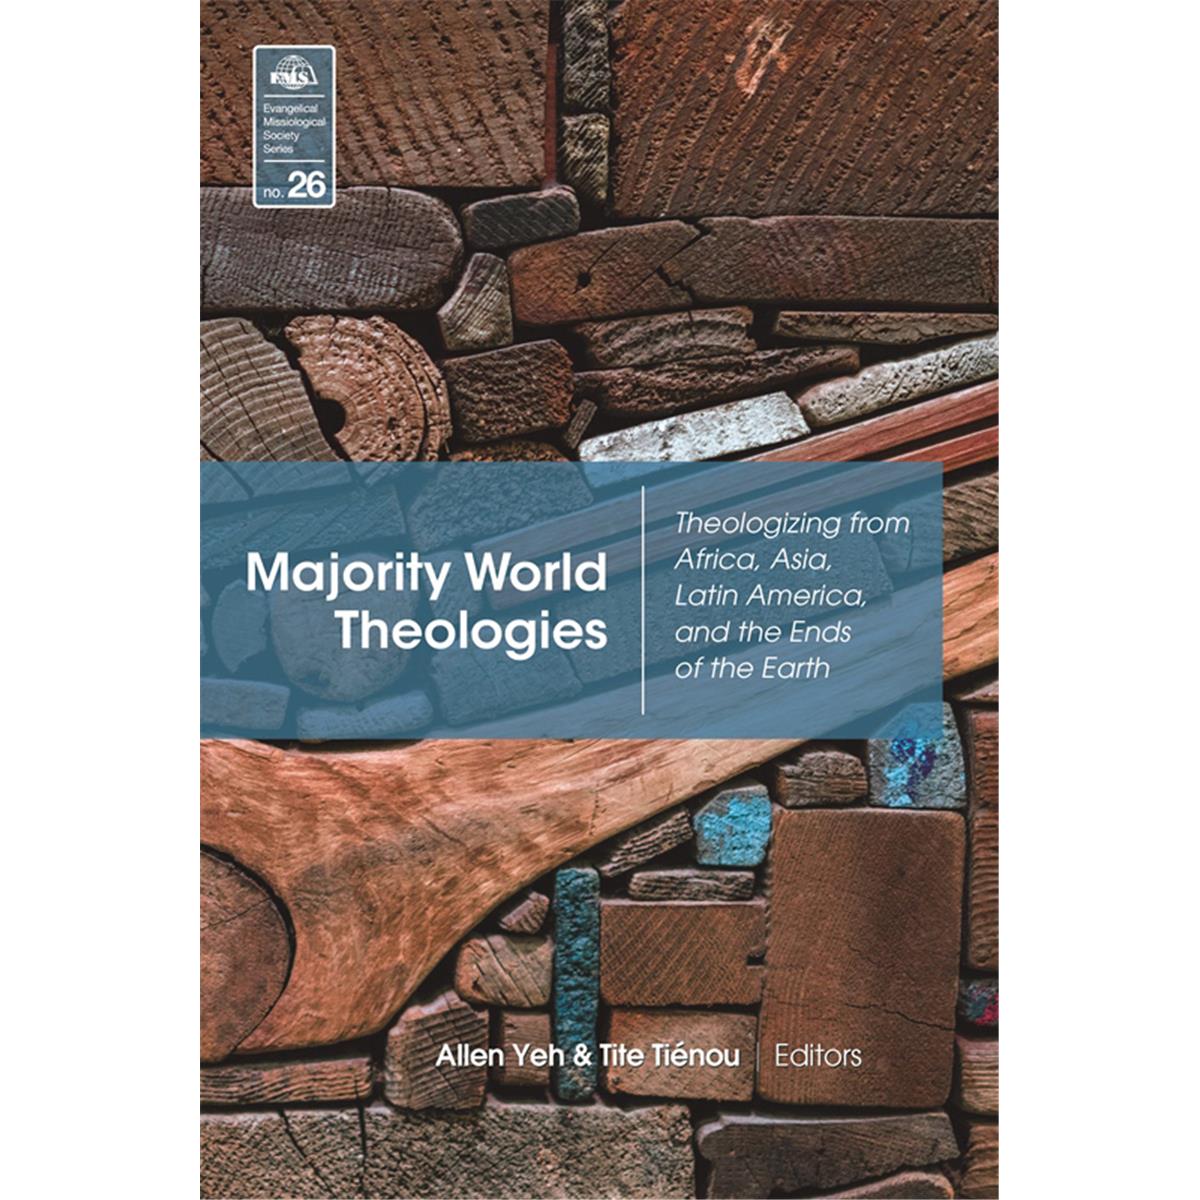 William Carey Publishing 135741 Majority World Theologies Theologizing From Africa Asia Latin America & The Ends Of The Earth